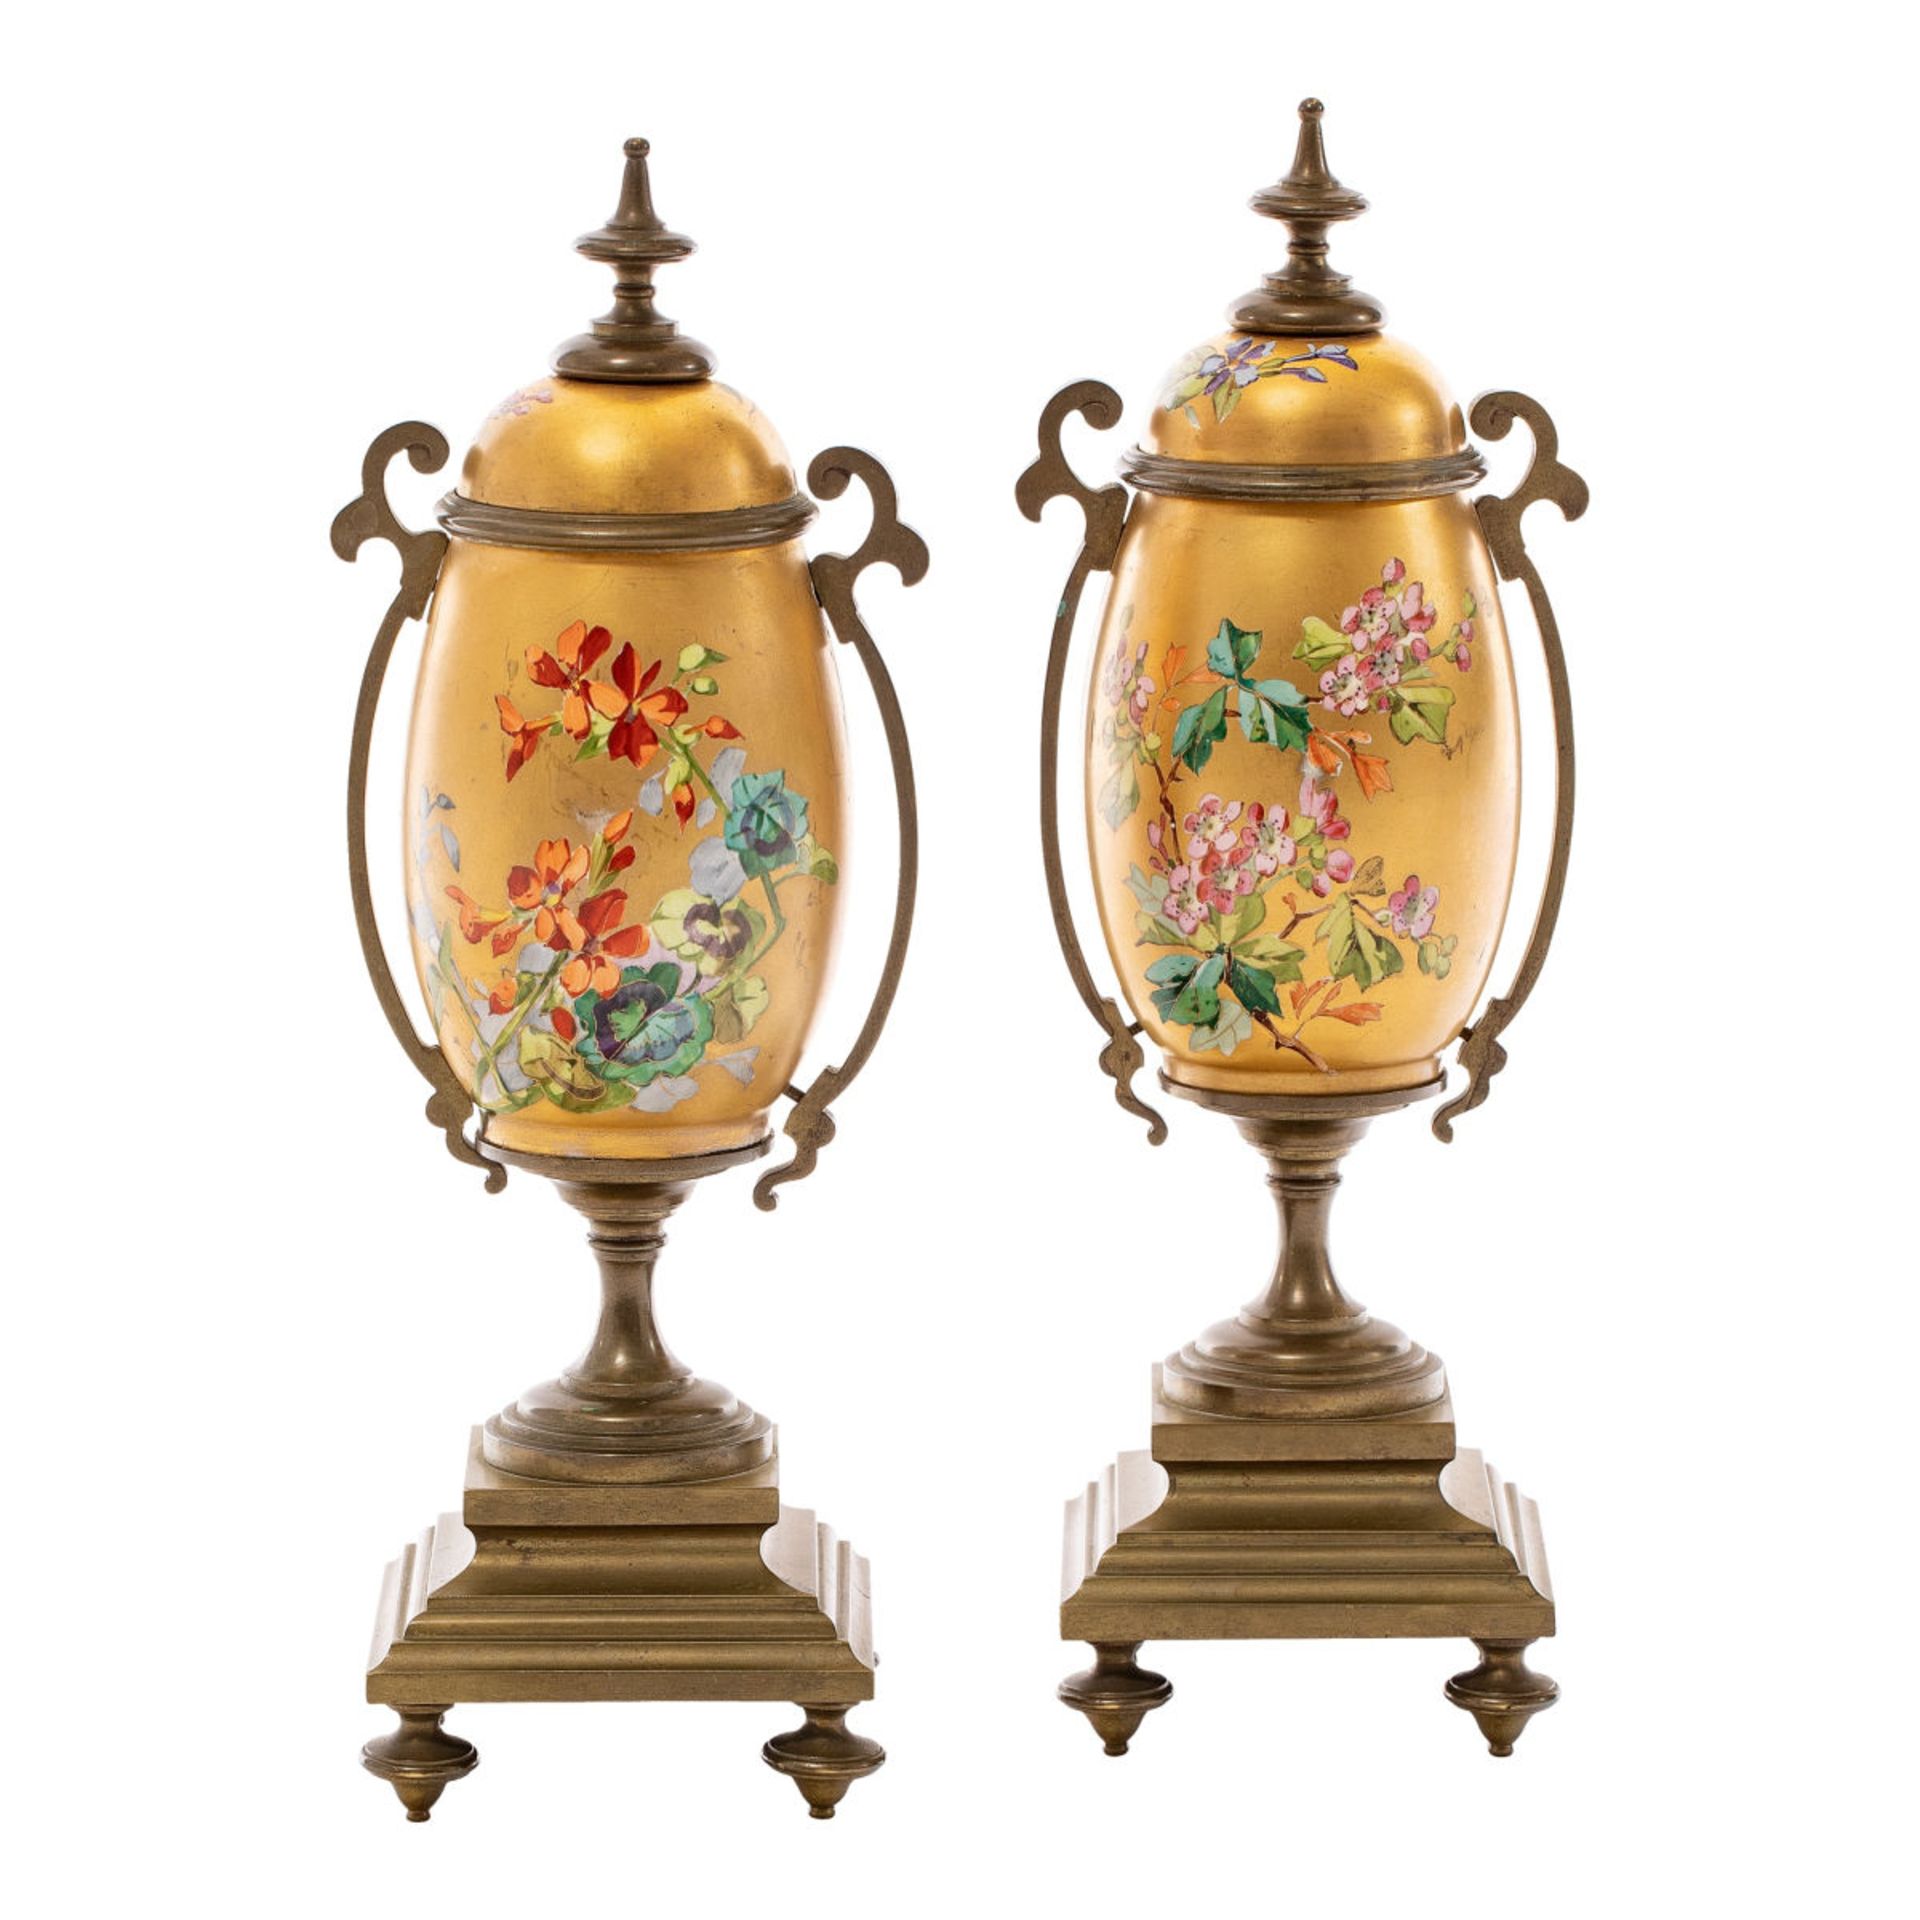 Pair of decorative vases with gold background - Image 2 of 2